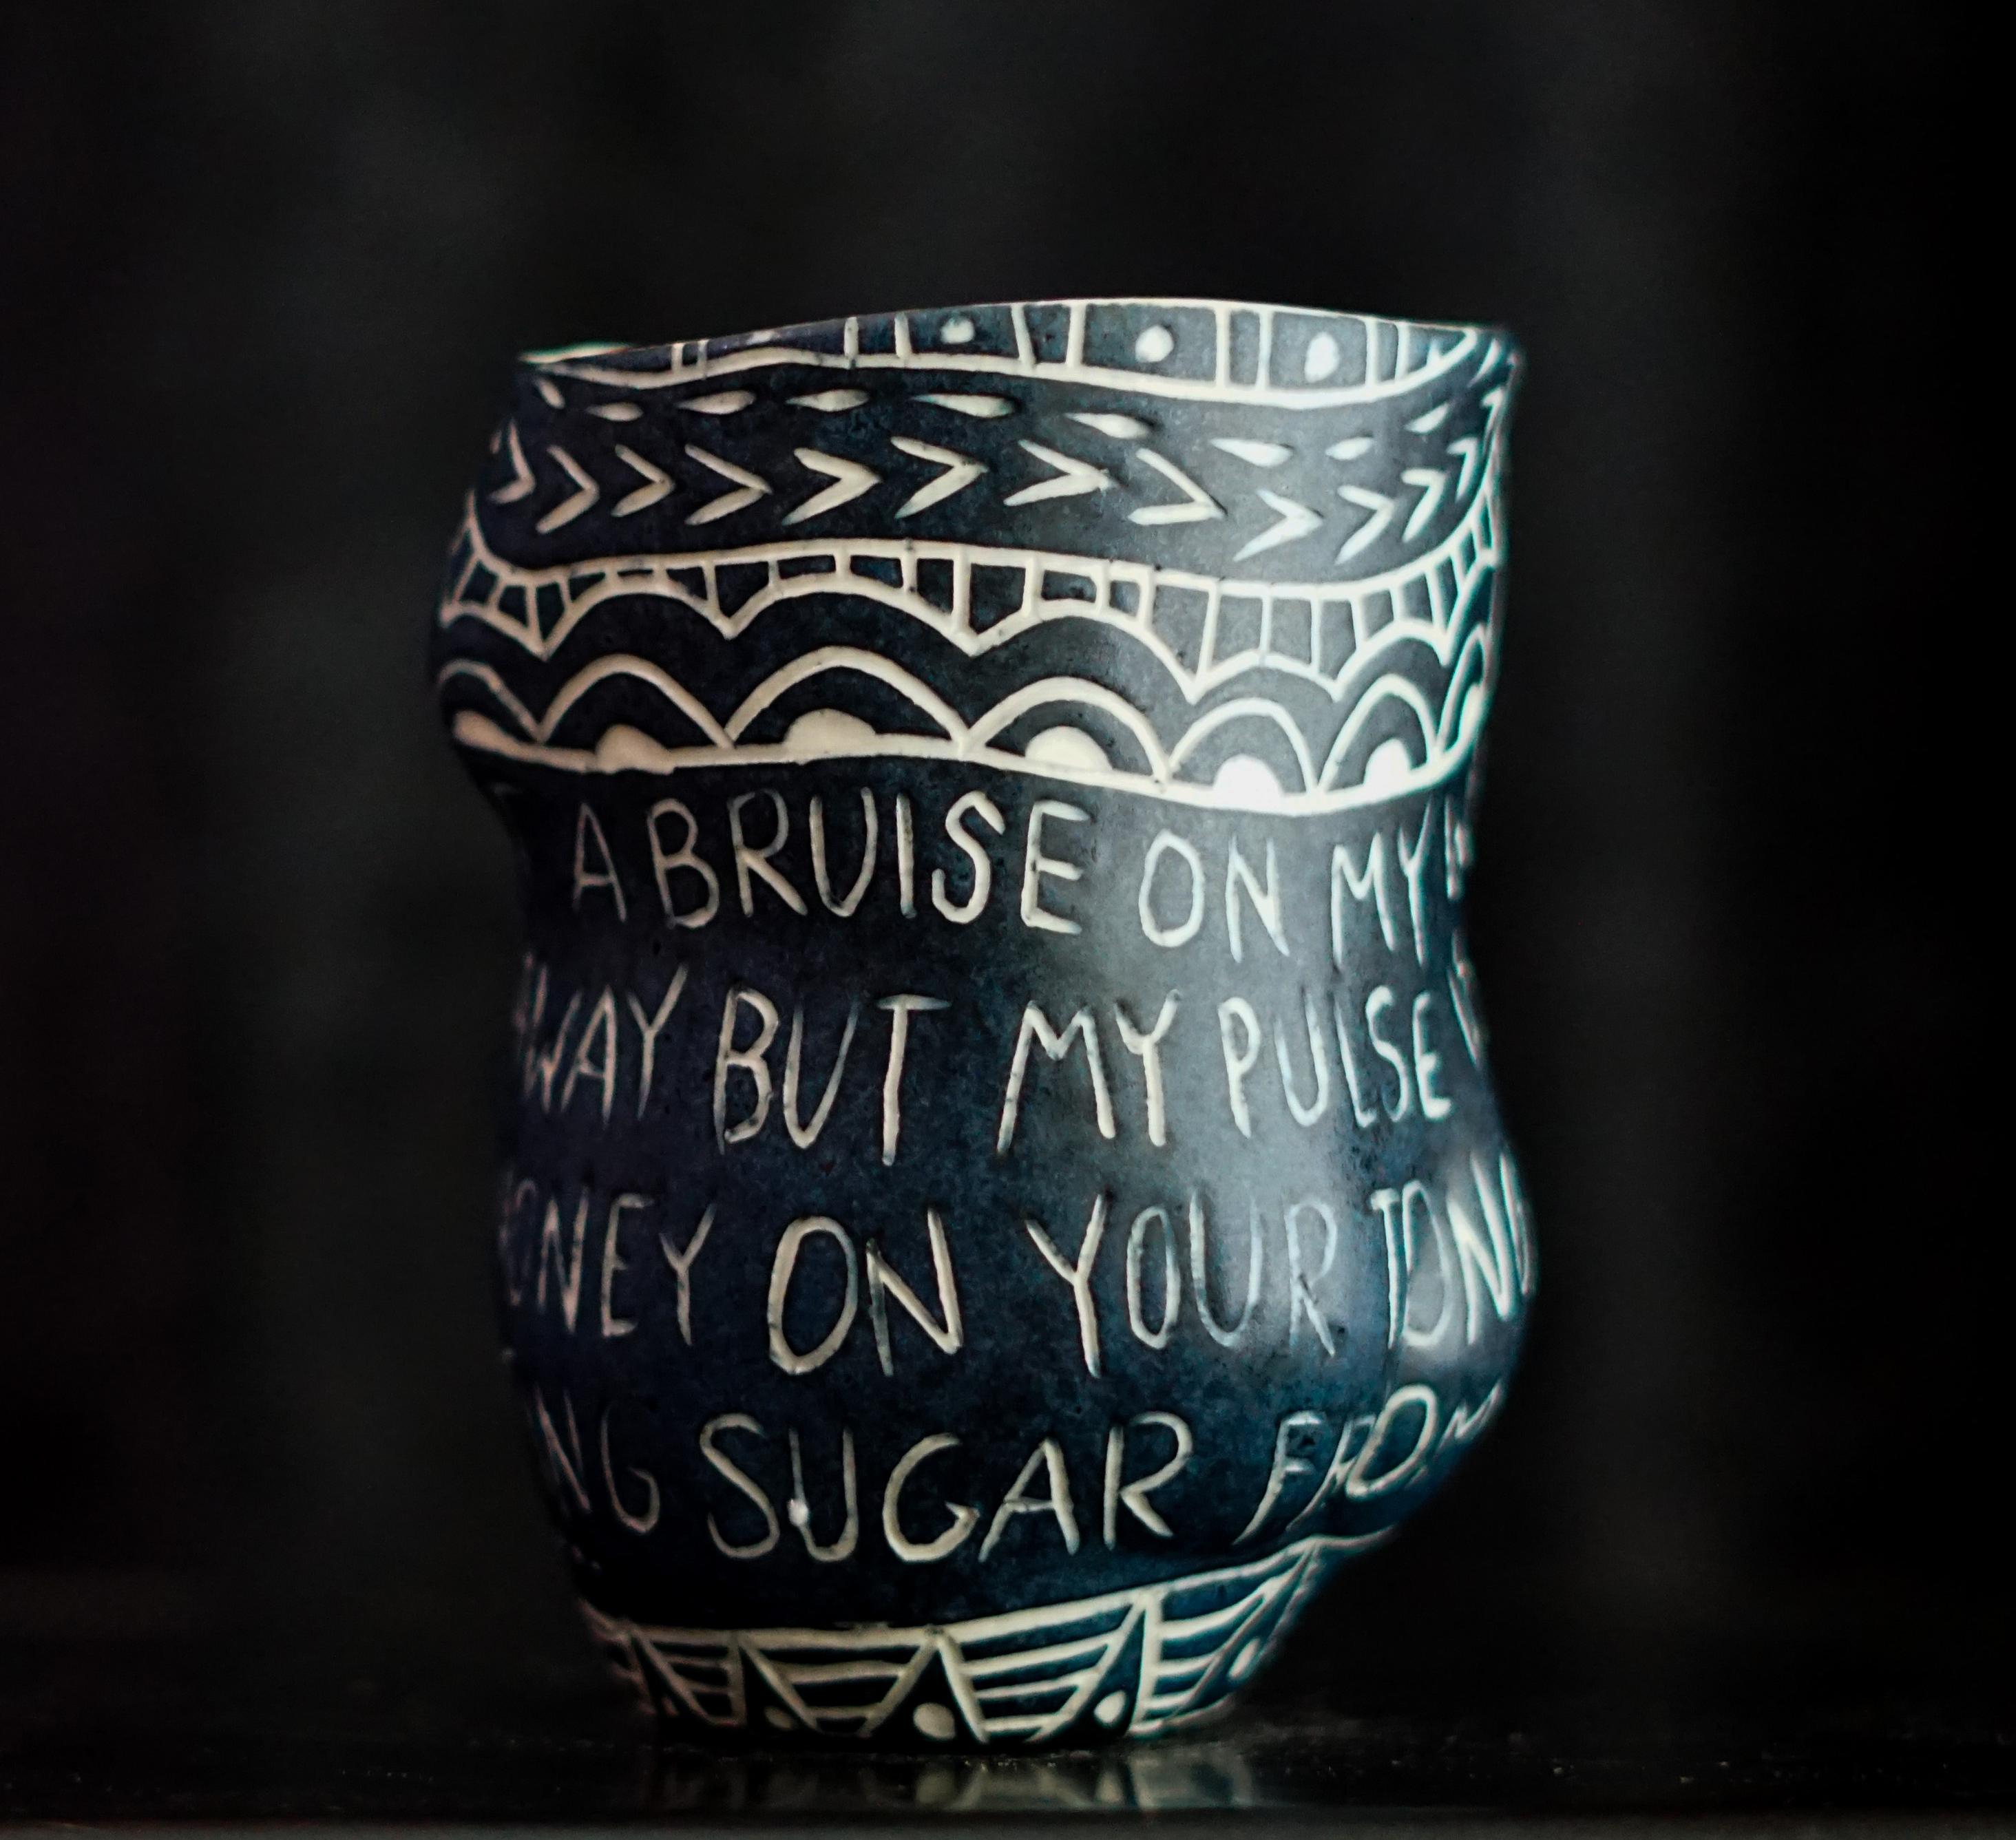 “Your Lipstick Left a Bruise..” Porcelain cup with sgraffito detailing - Modern Sculpture by Alex Hodge